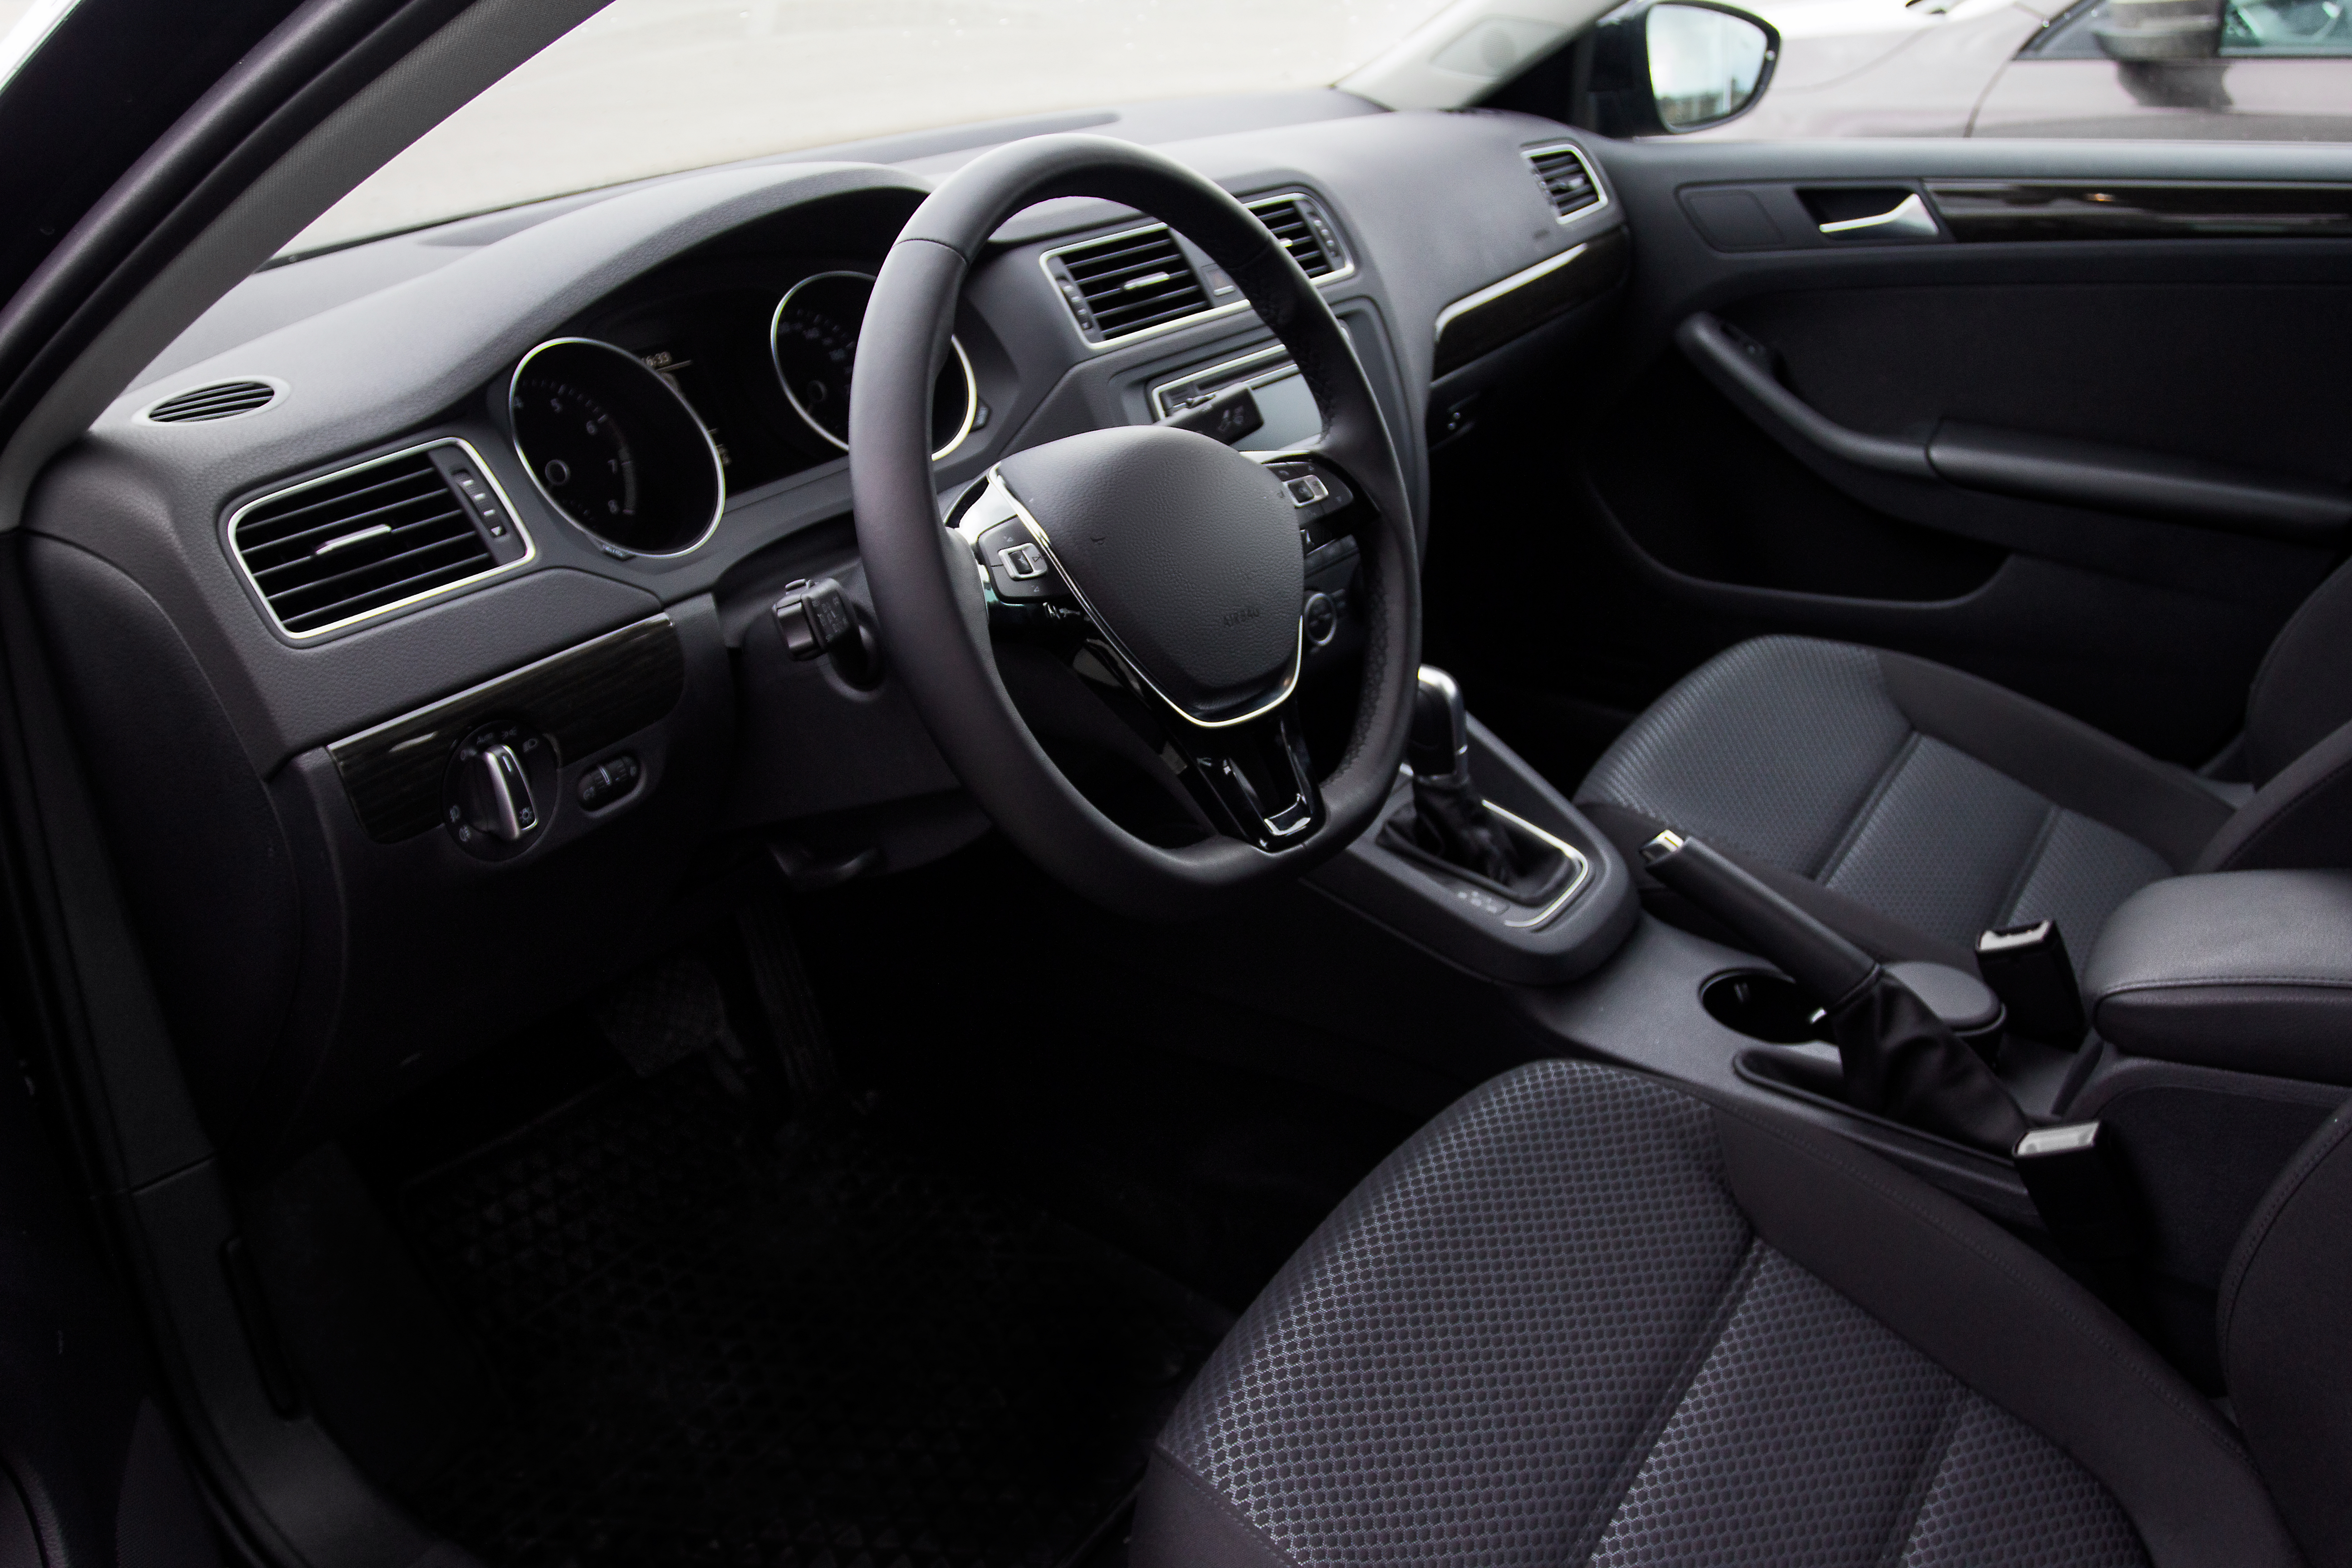 Driver's seat of the car. Interior of the car. | Source: Shutterstock